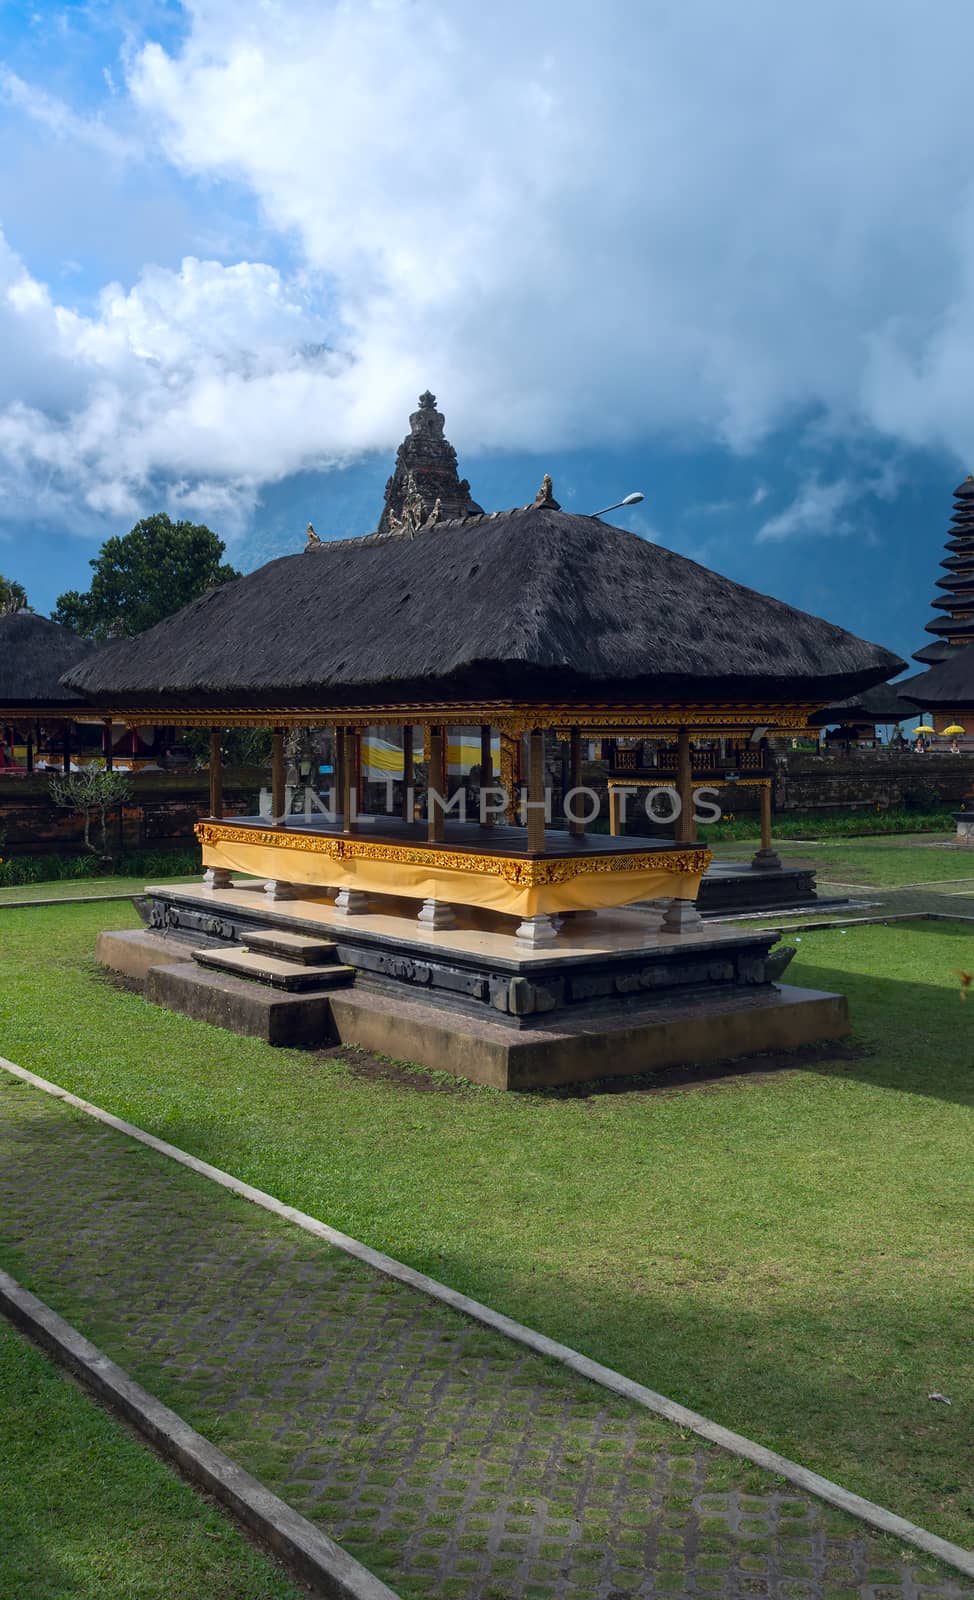 Famouse temple in Bali